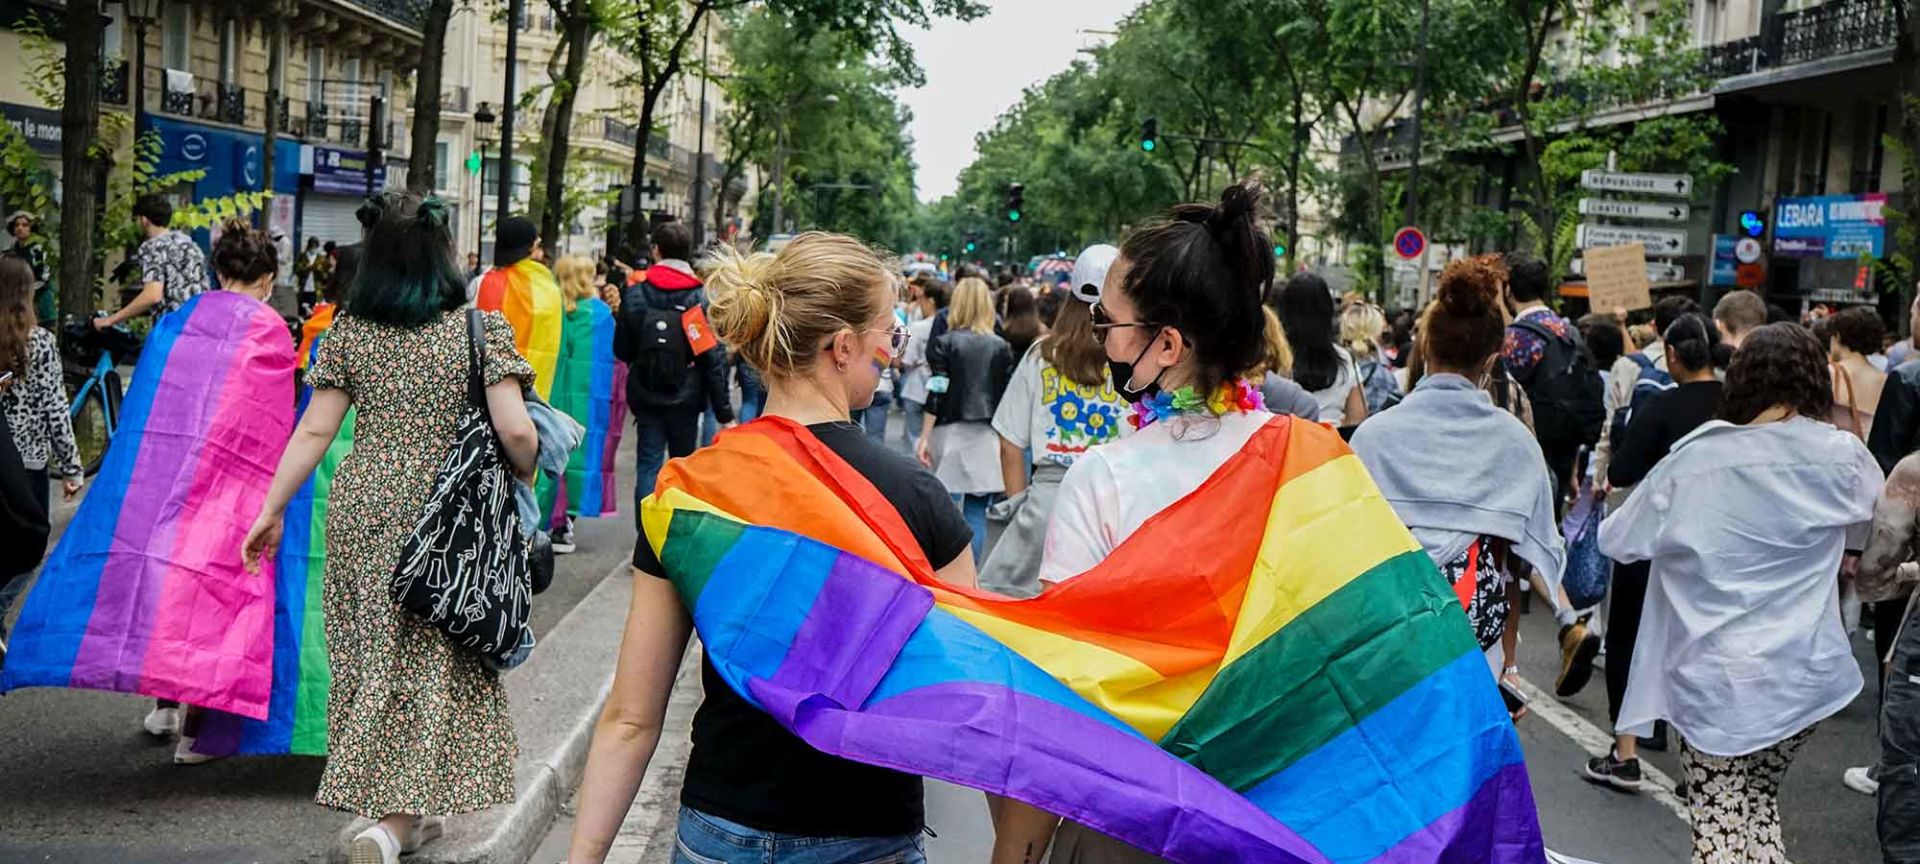 A Group Of People Walking Down A Street Holding Rainbow Flag